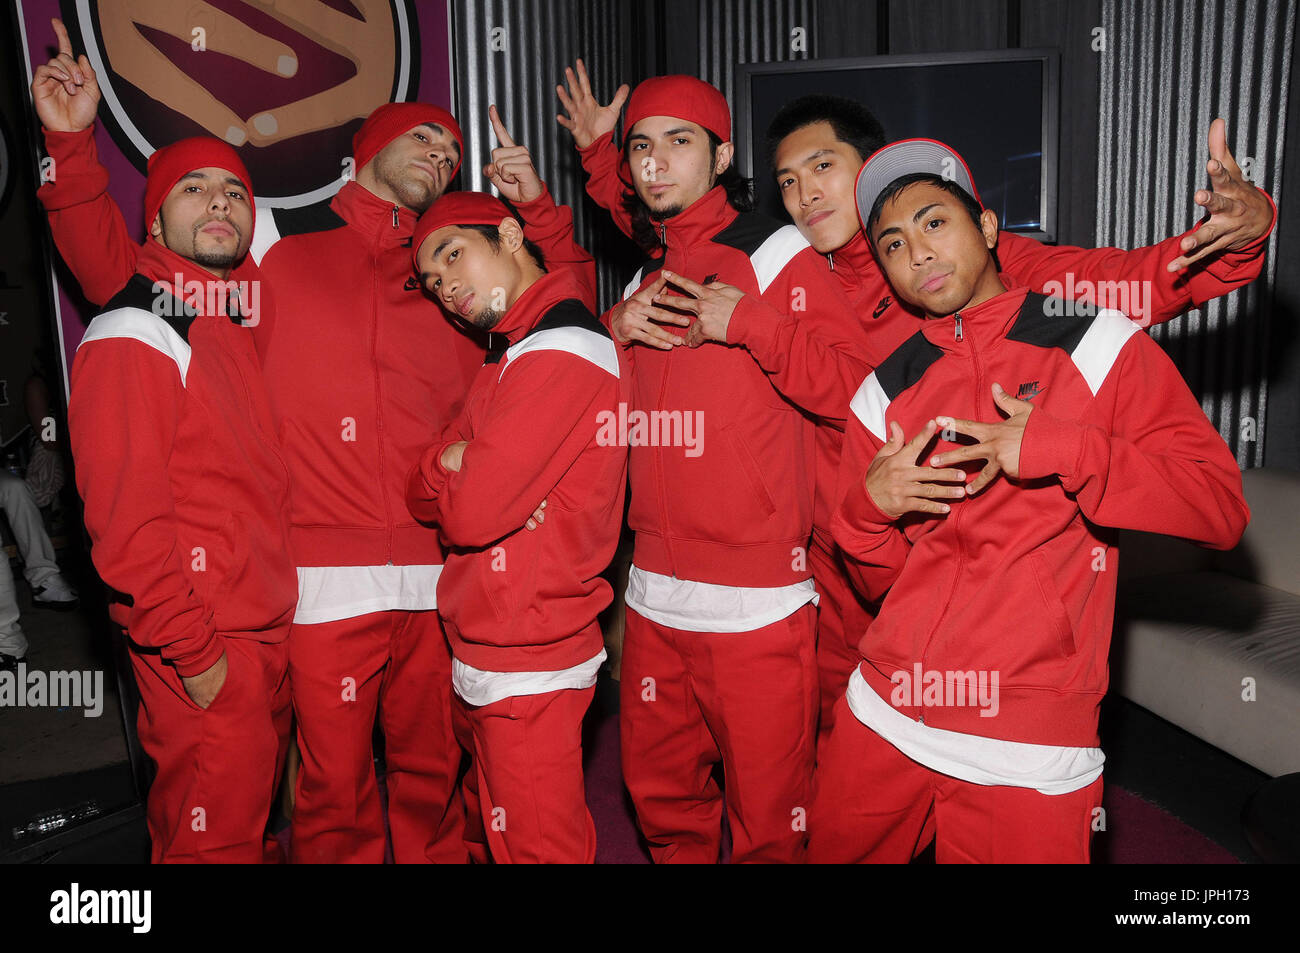 Super Cr3w  at the Live Taping of "America's Best Dance Crew: Battle for the VMAs" - Backstage of Stage 23 at the Warner Bros. Studio in Burbank, CA. The event took place on Thursday, August 28, 2008. Photo by: Sthanlee B. Mirador_Pacific Rim Photo Press. Stock Photo